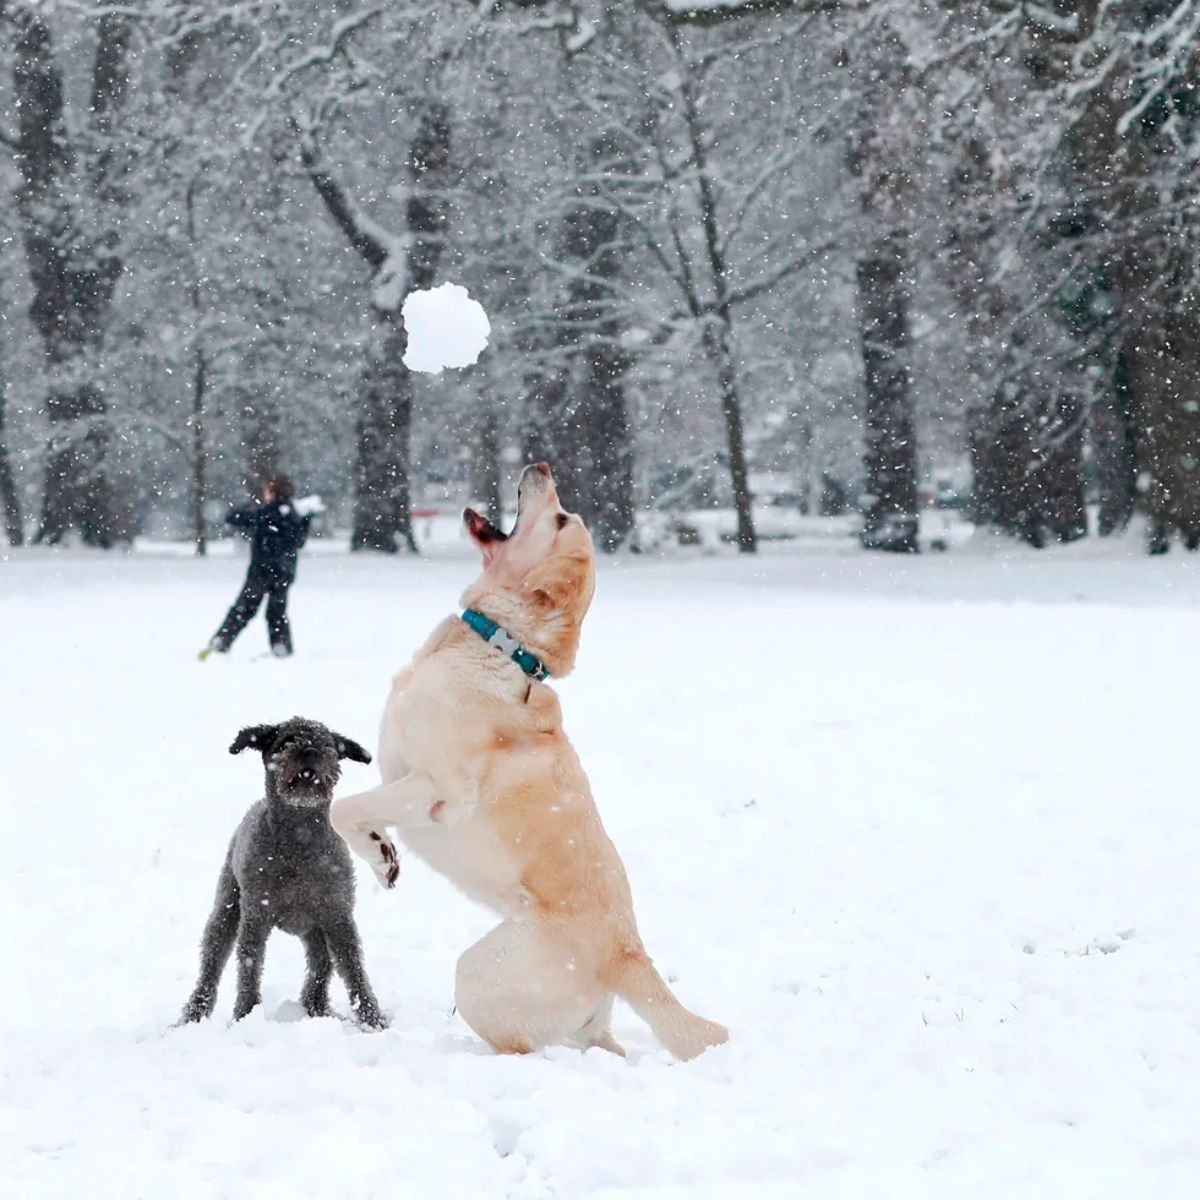 yellow labrador retriever jumping to catch a snowball with a smaller black dog next to it